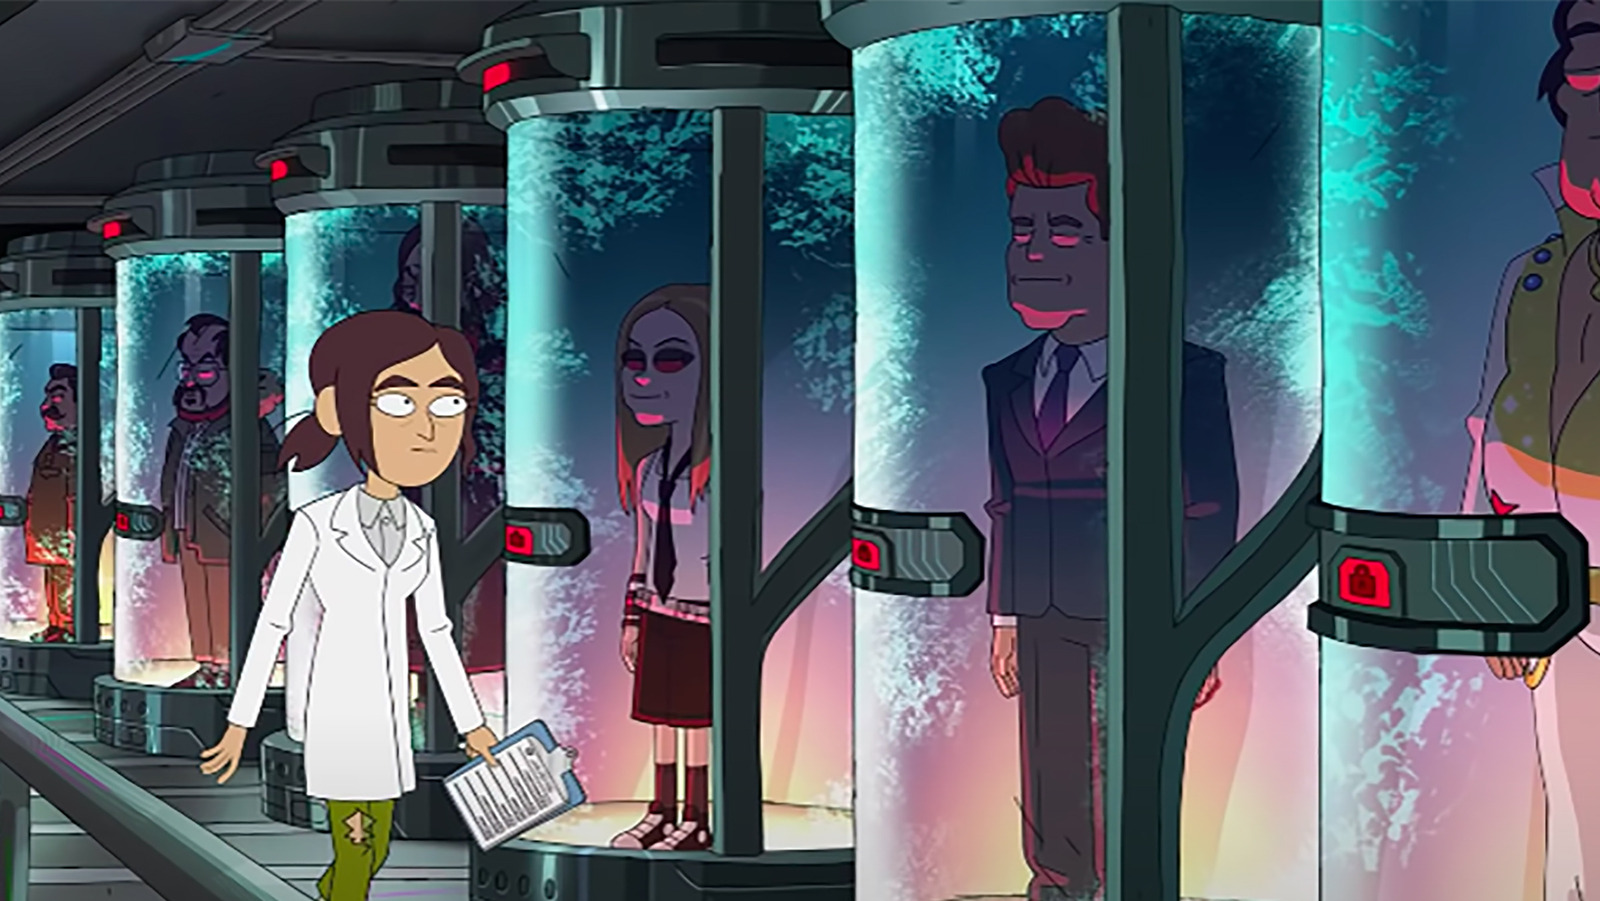 5 Reasons Rick And Morty Fans Will Love Netflix's Inside Job